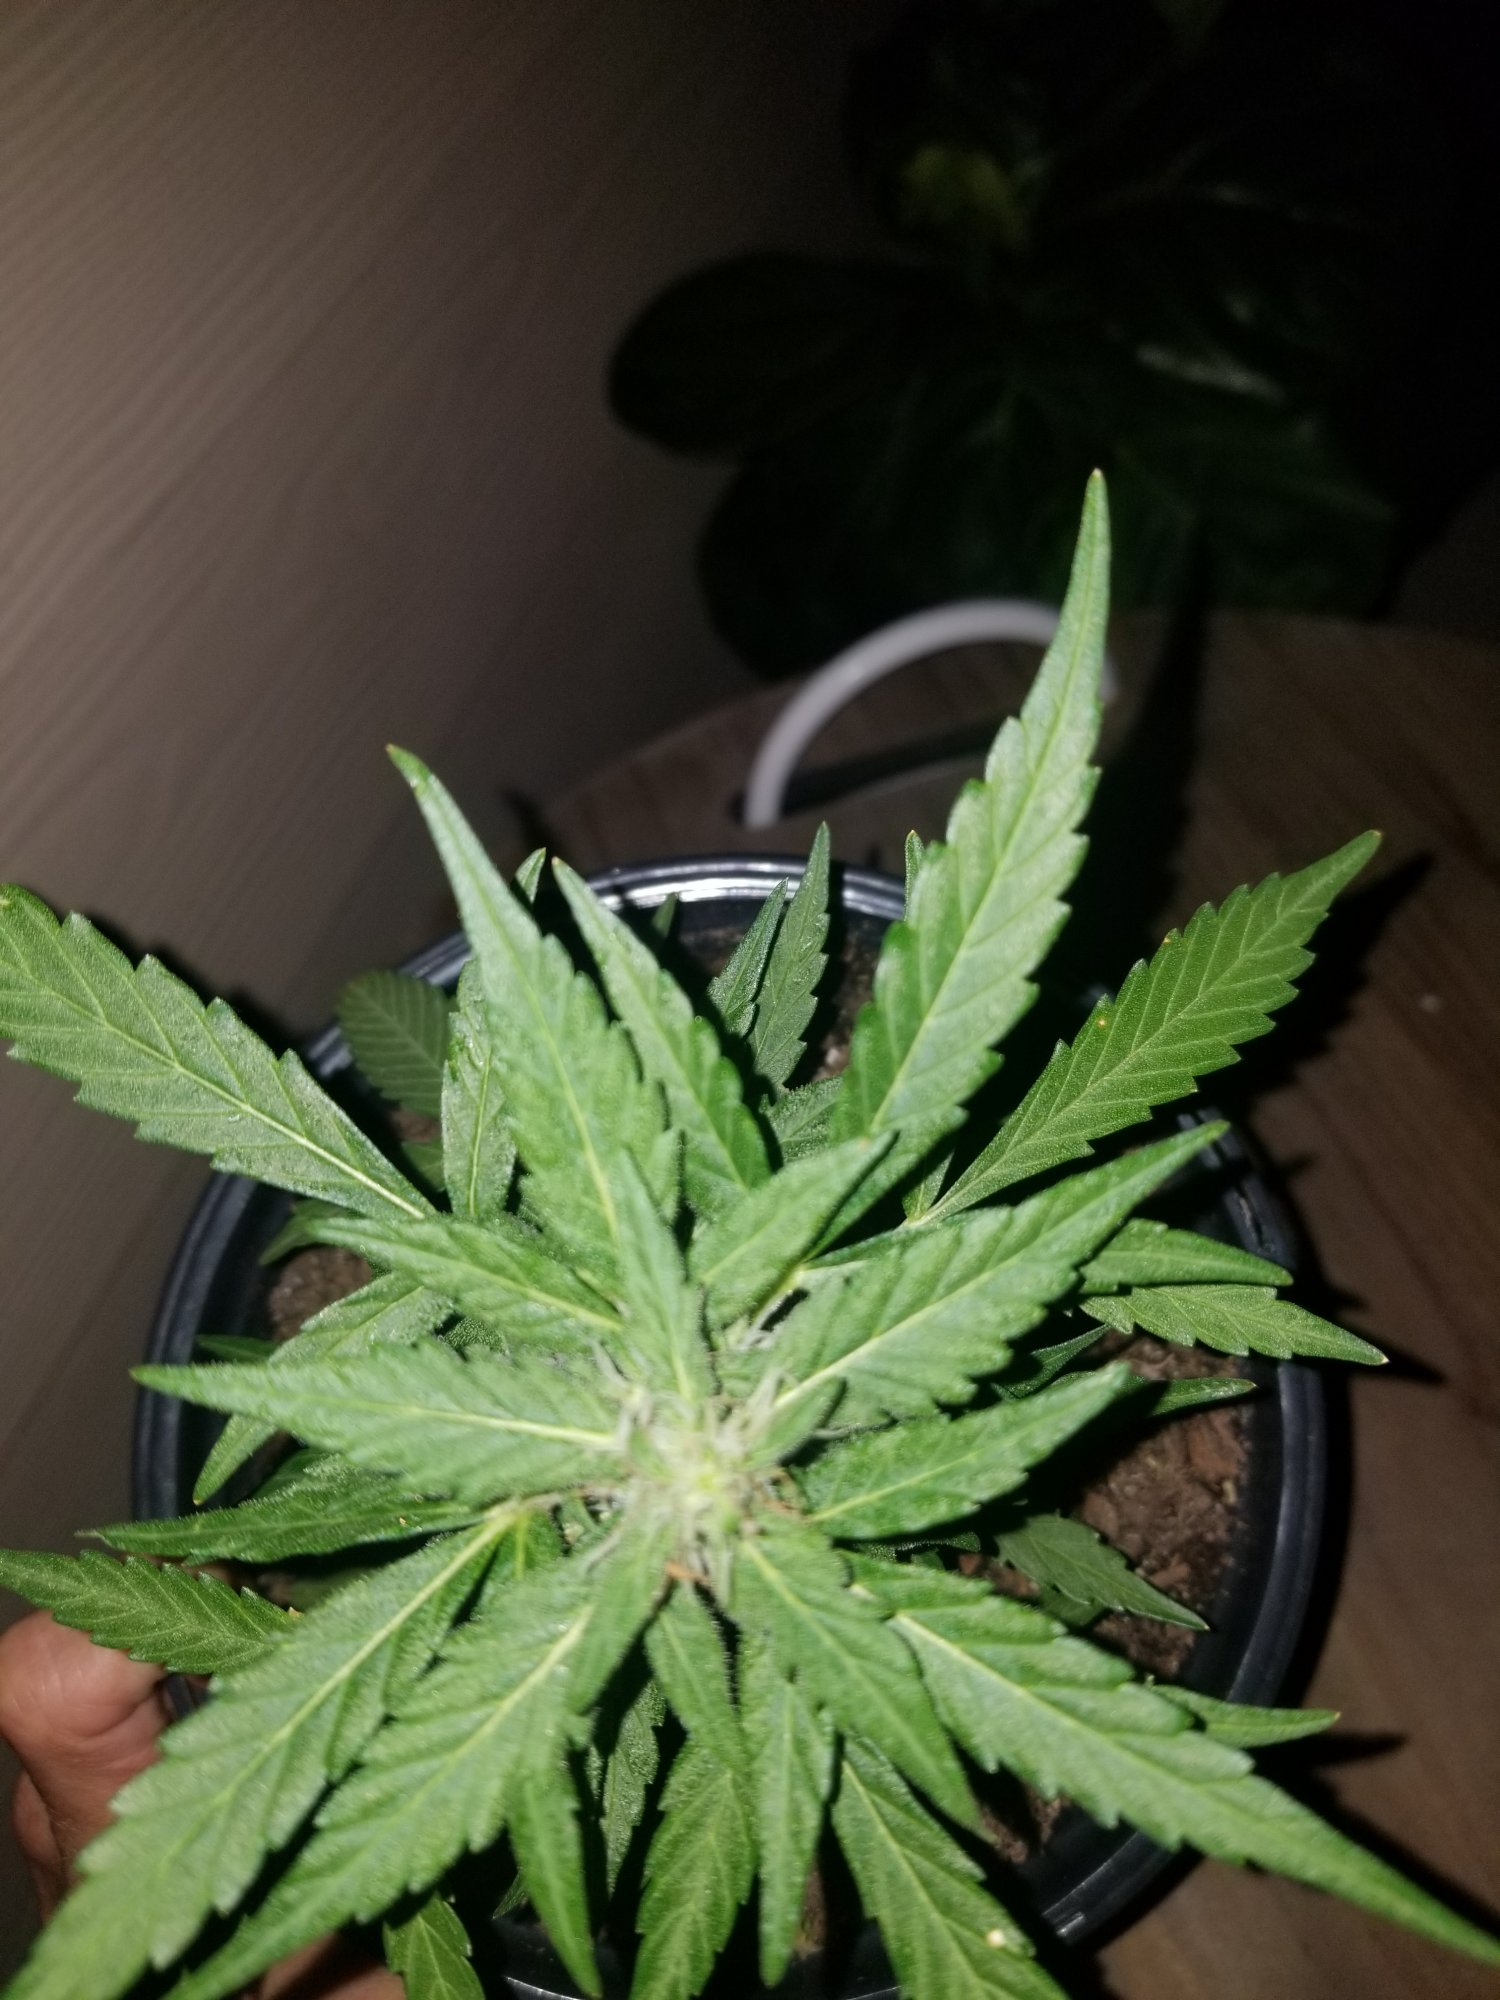 Is this right for 2 3 wks flower 3